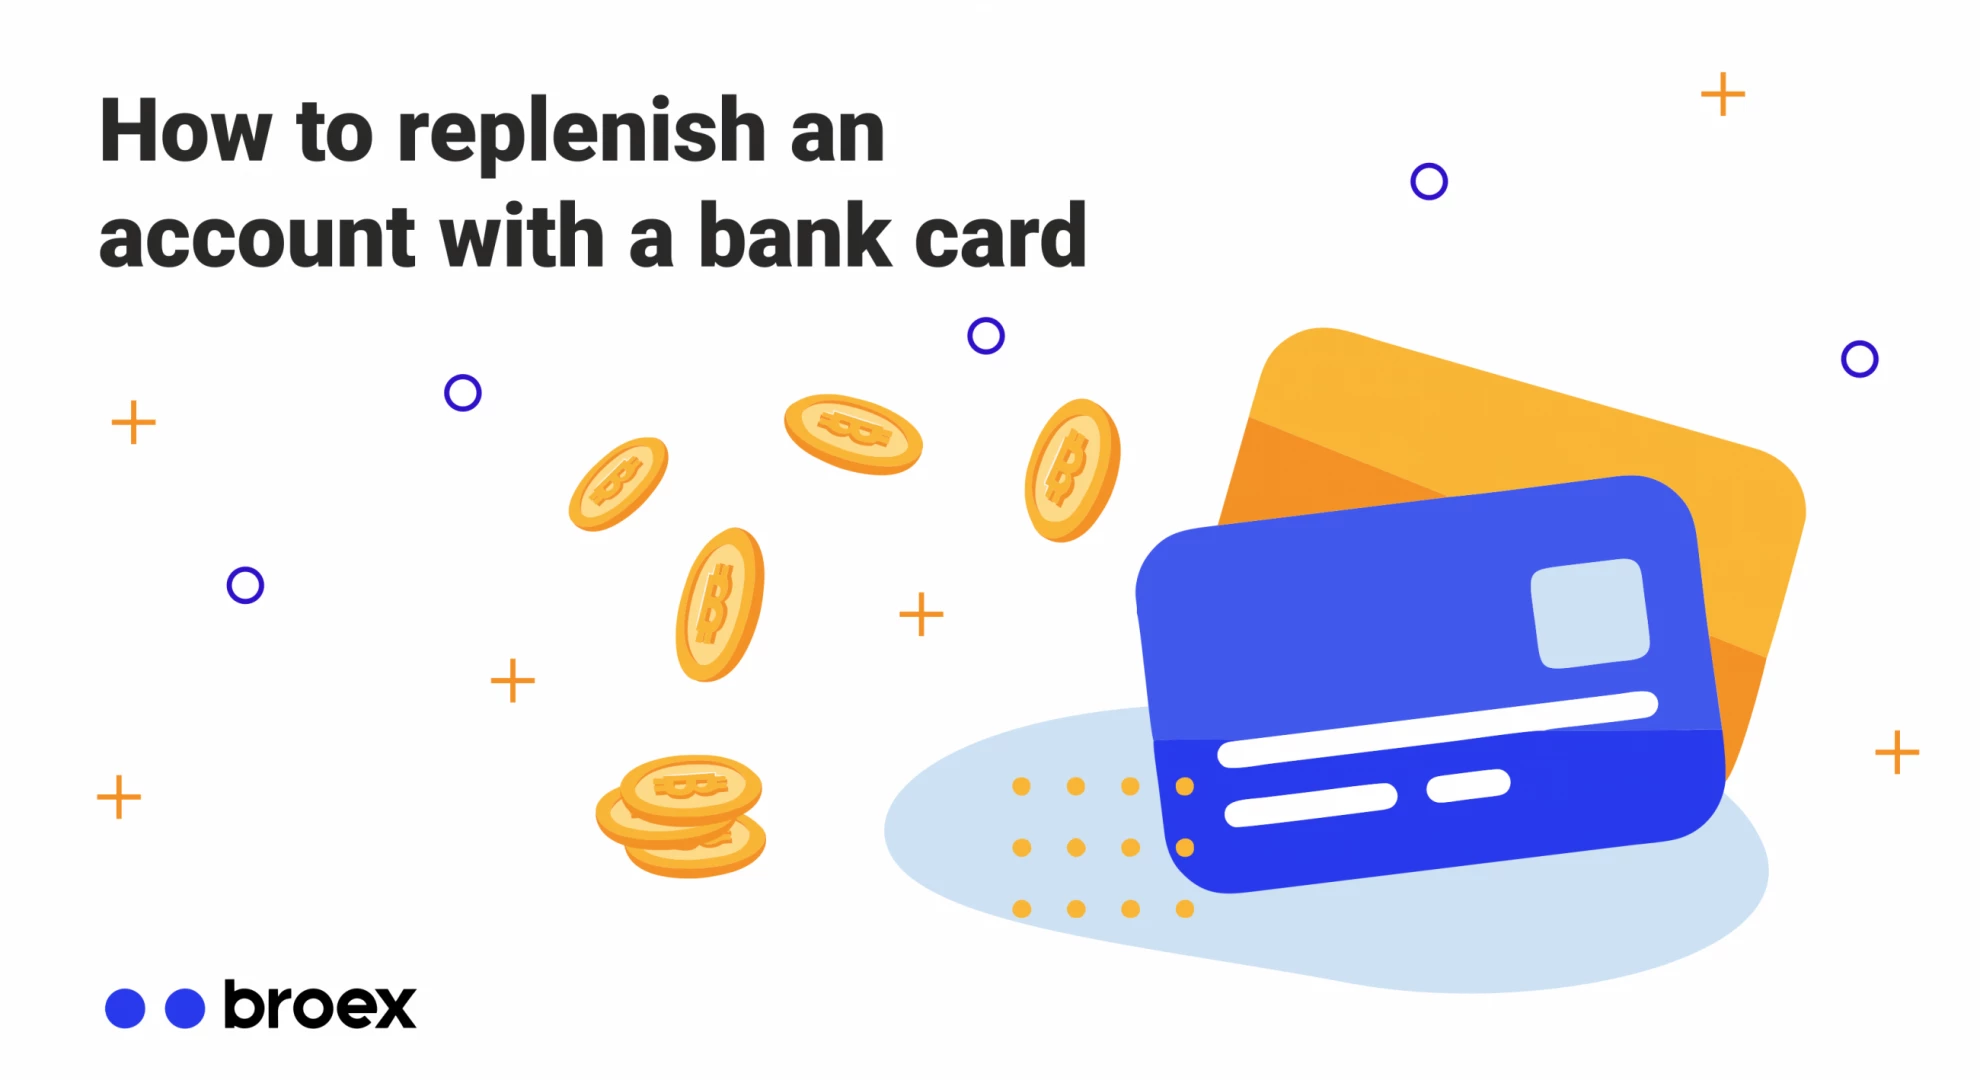 How to replenish an account with a bank card